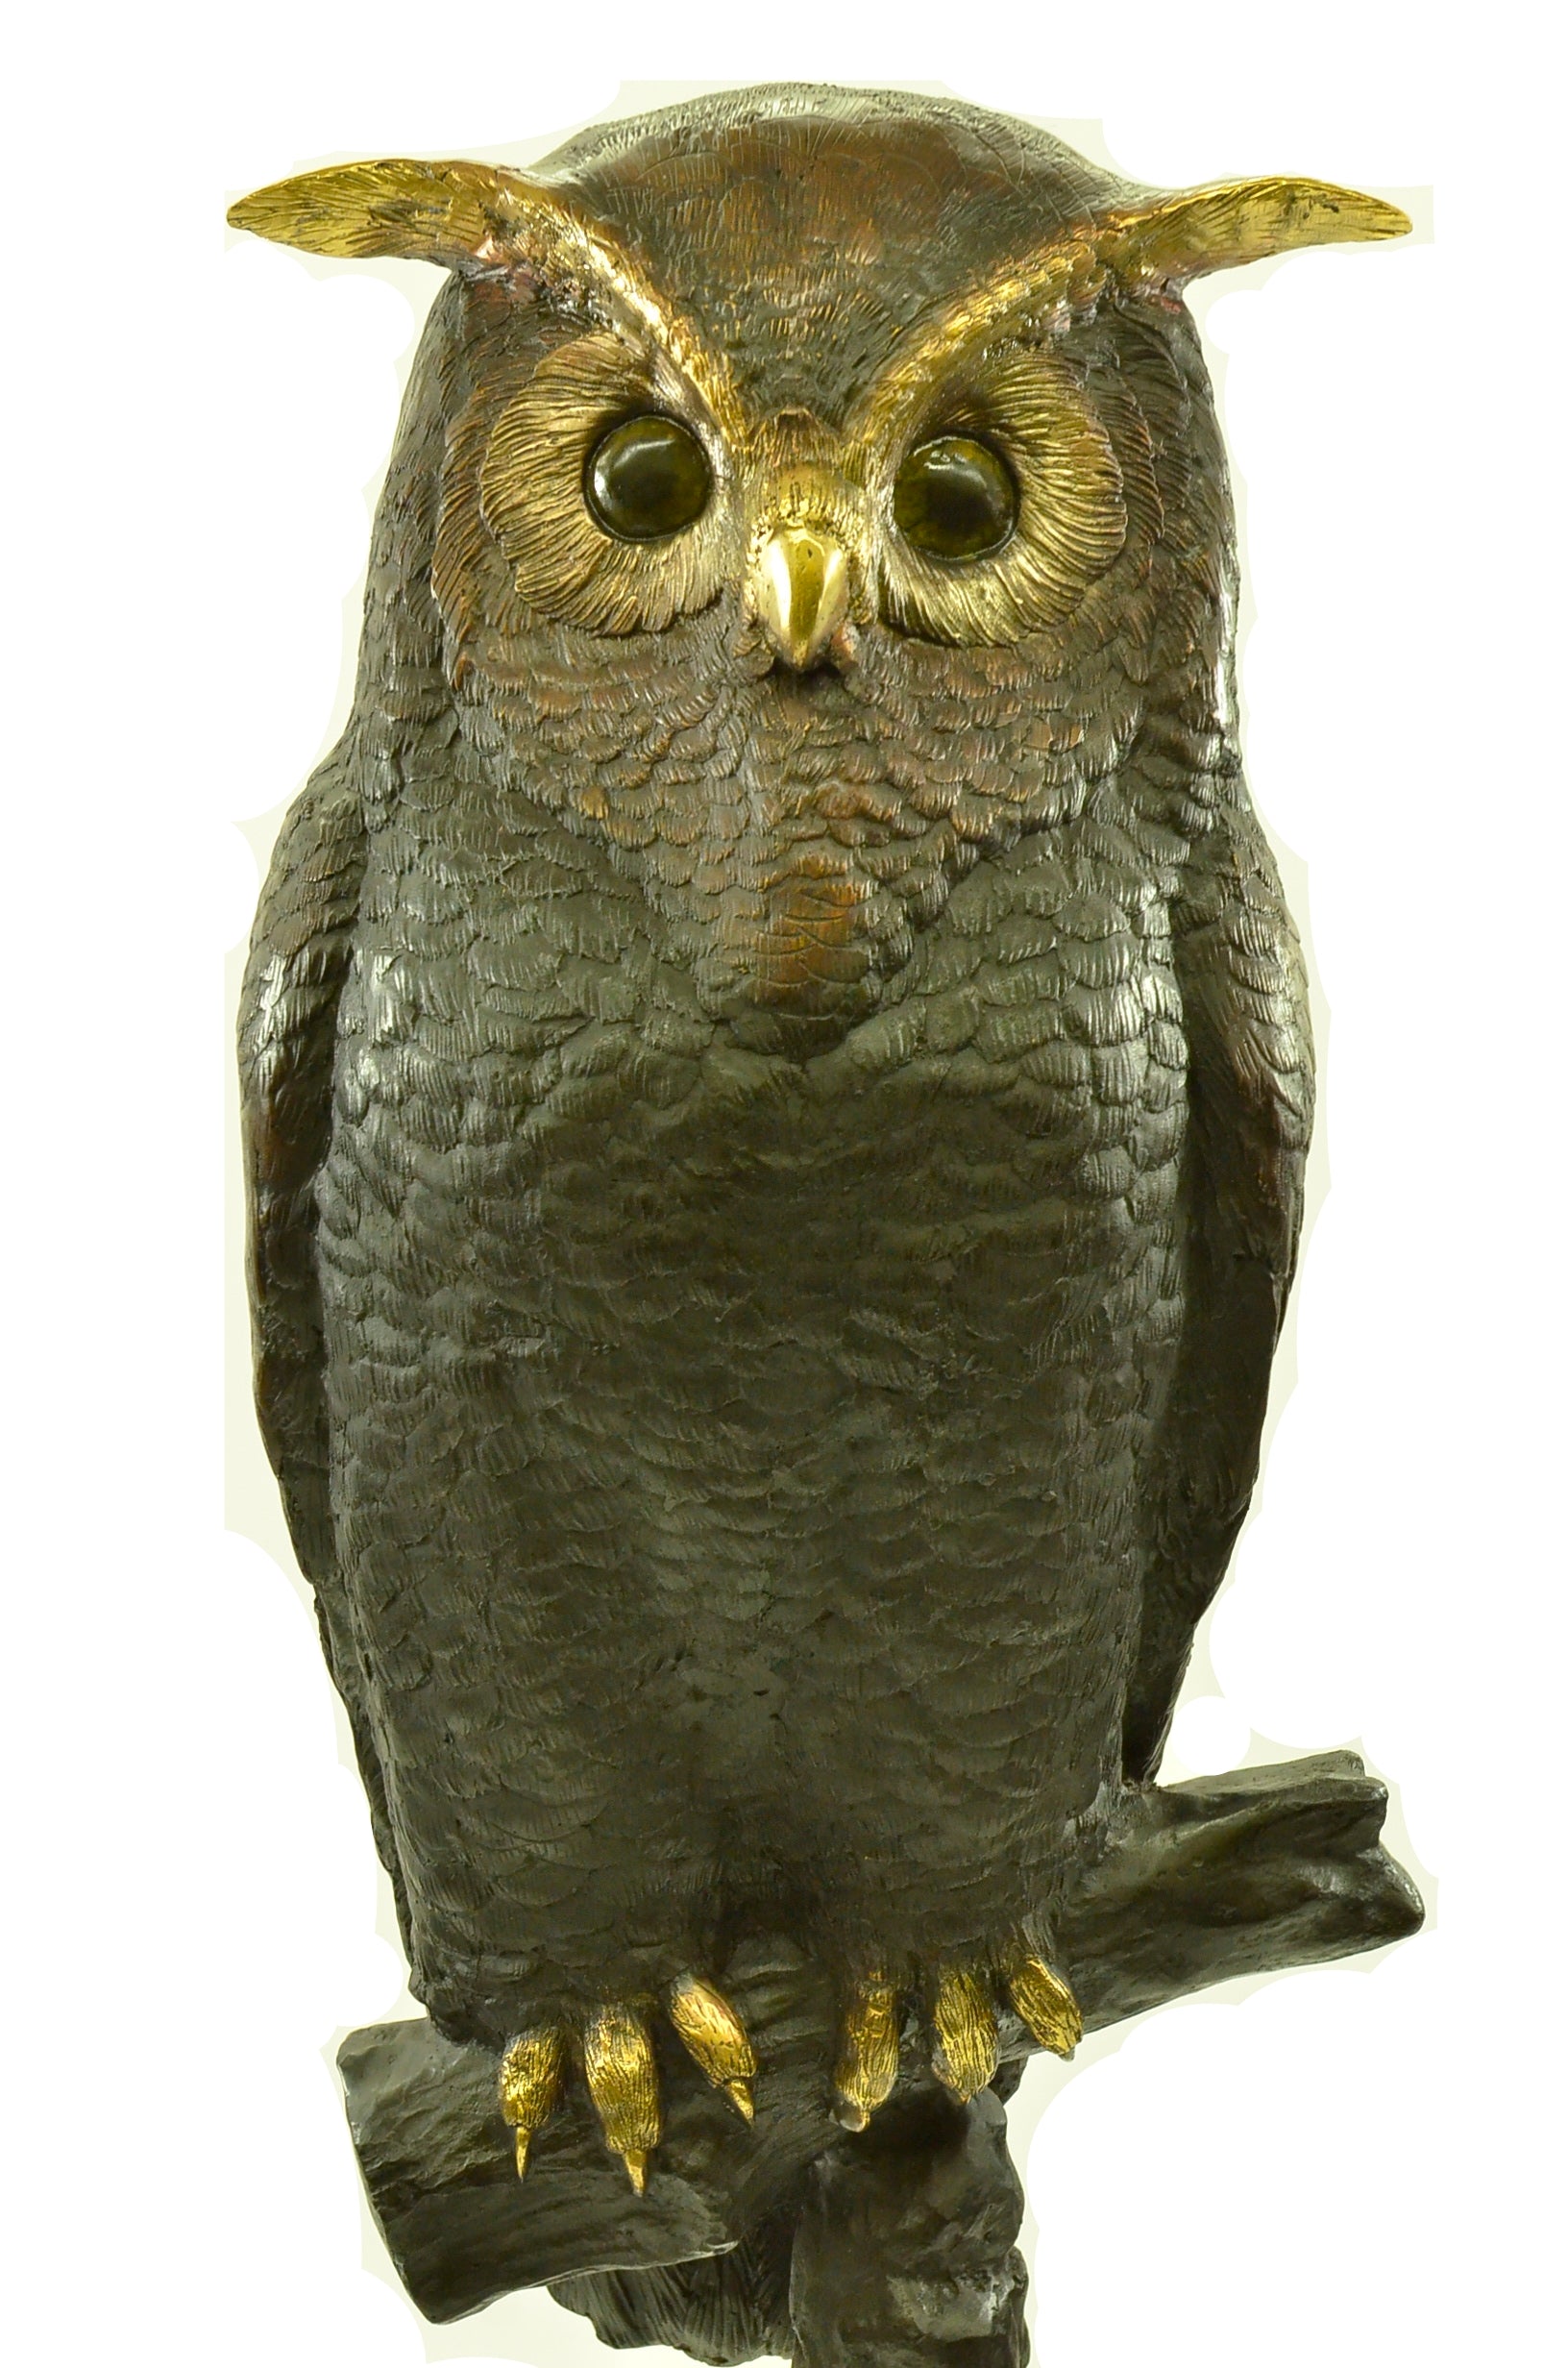 55"H Owl Lost Wax Bronze Sculpture by Nardini Extra Large Size Figurine Figure